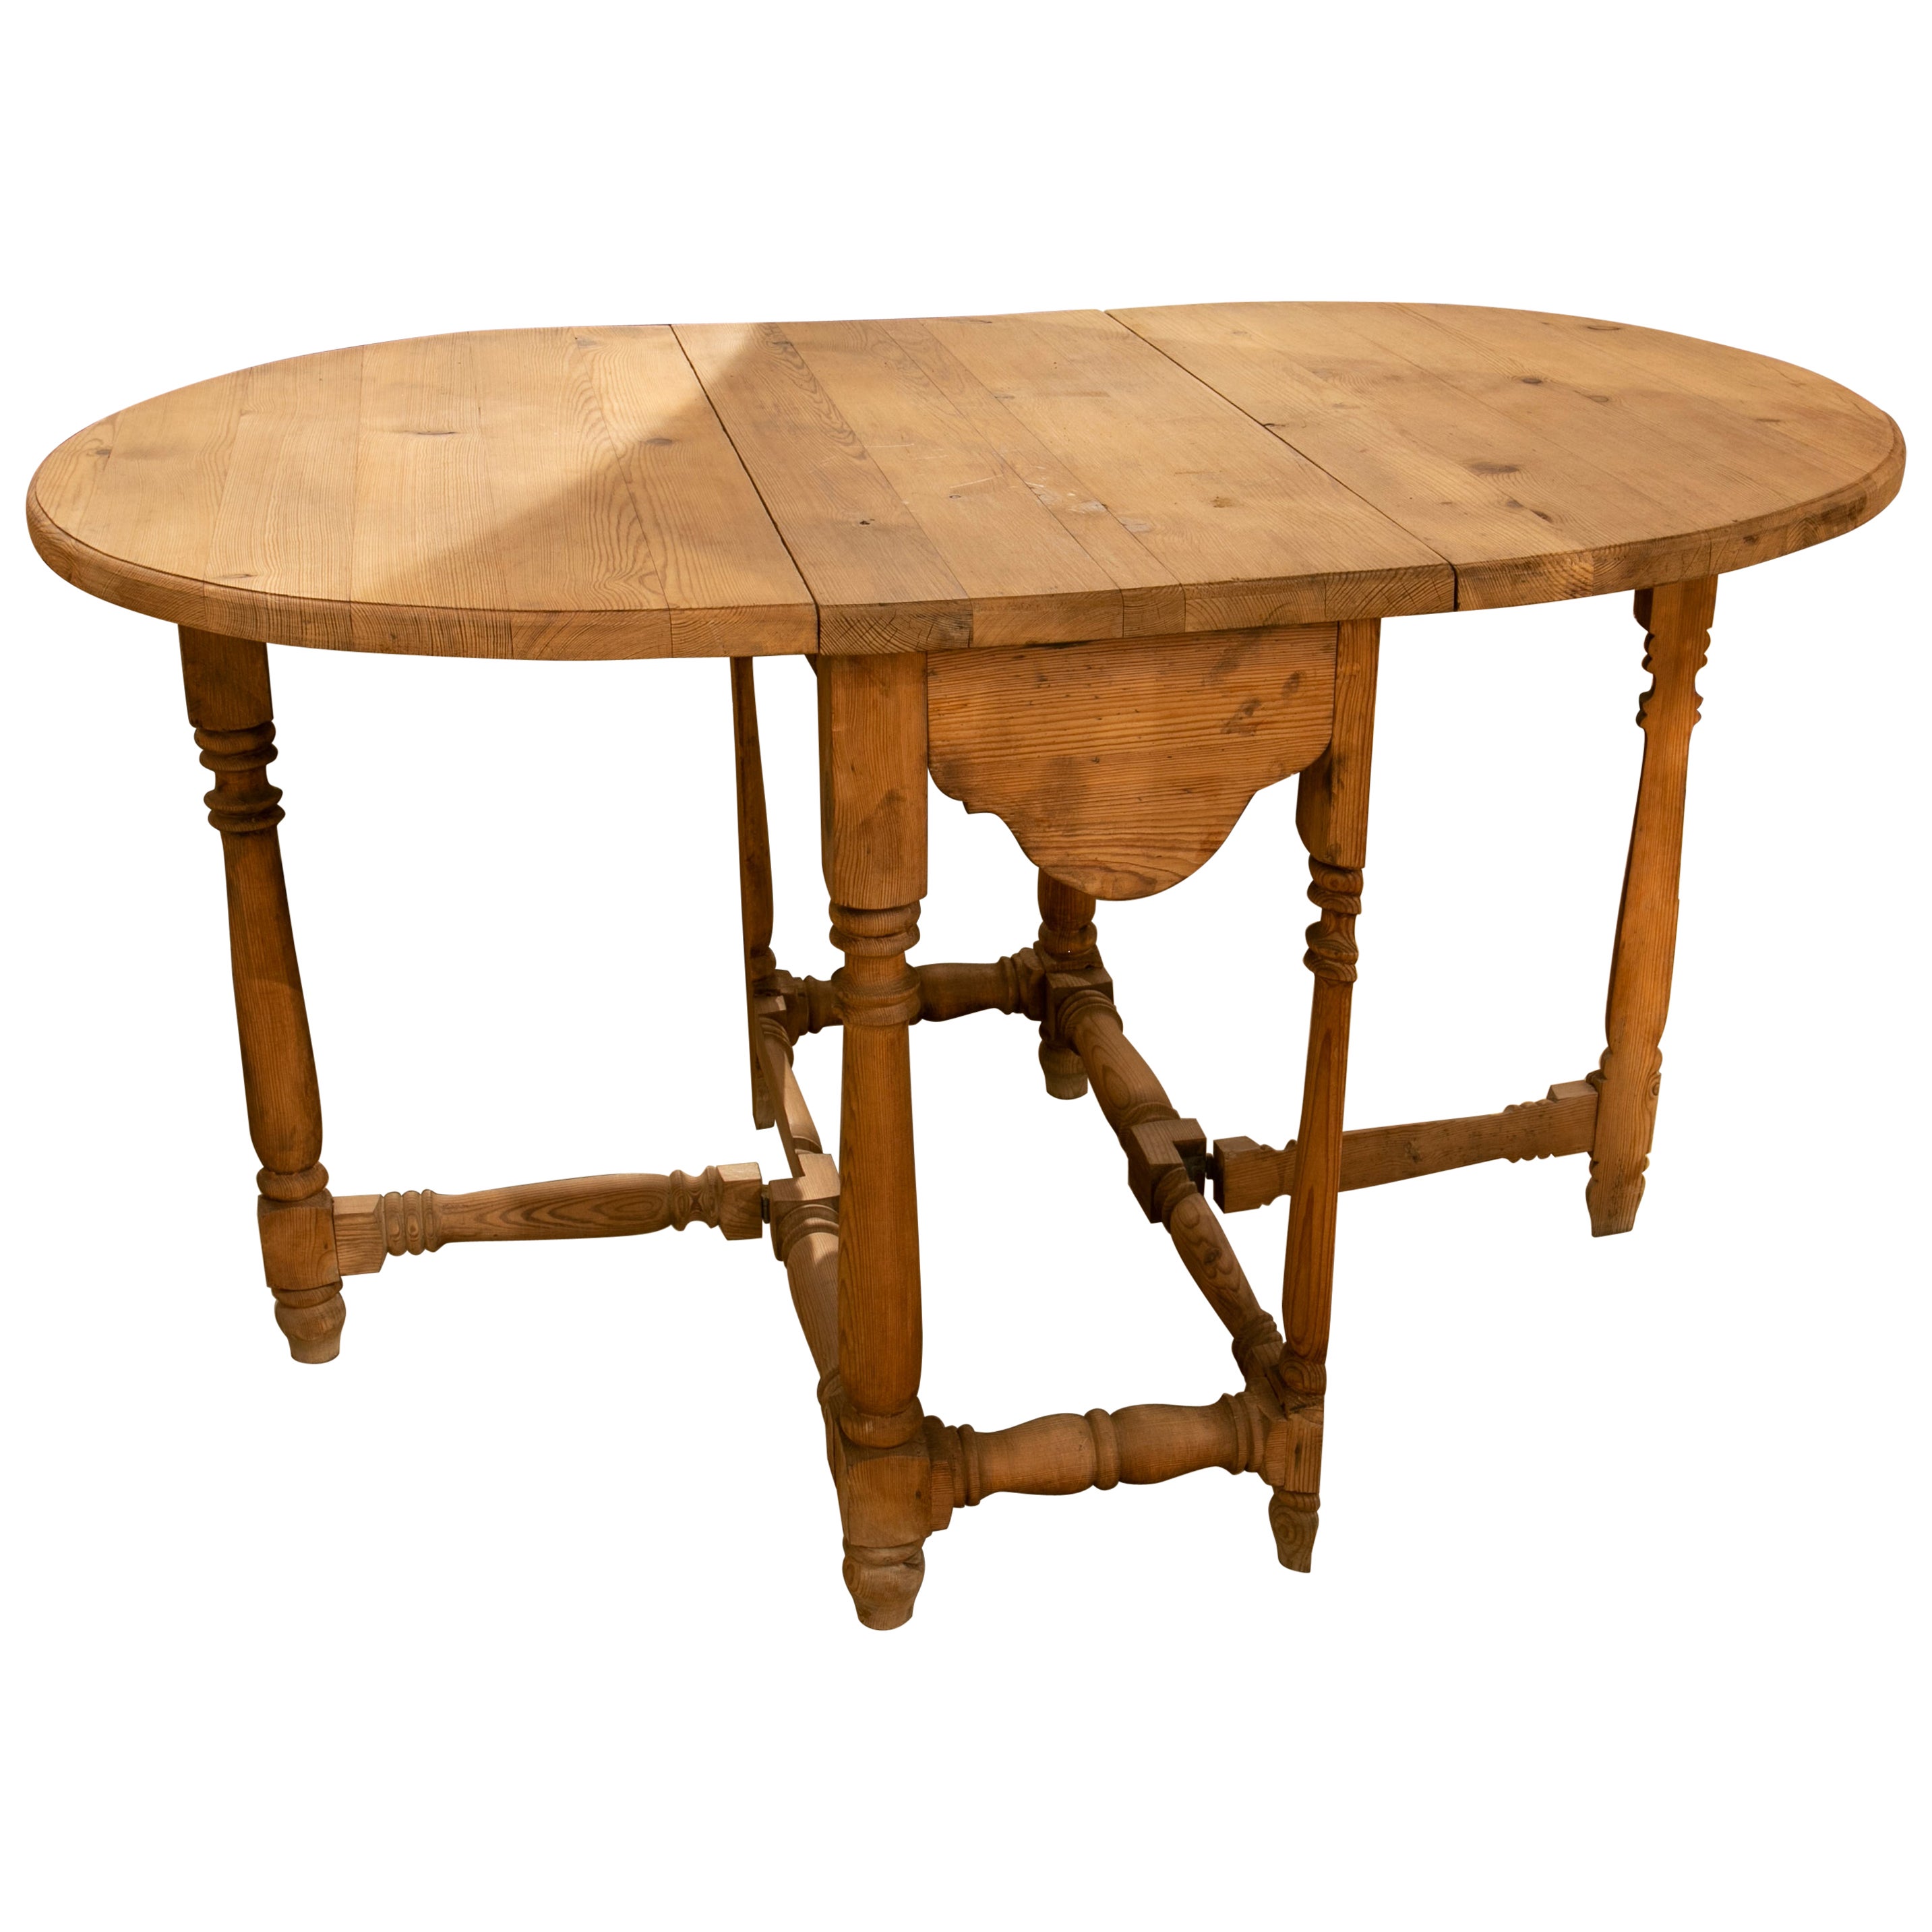 Wooden Carved Wing Table with Turned Legs and Hinged Sides